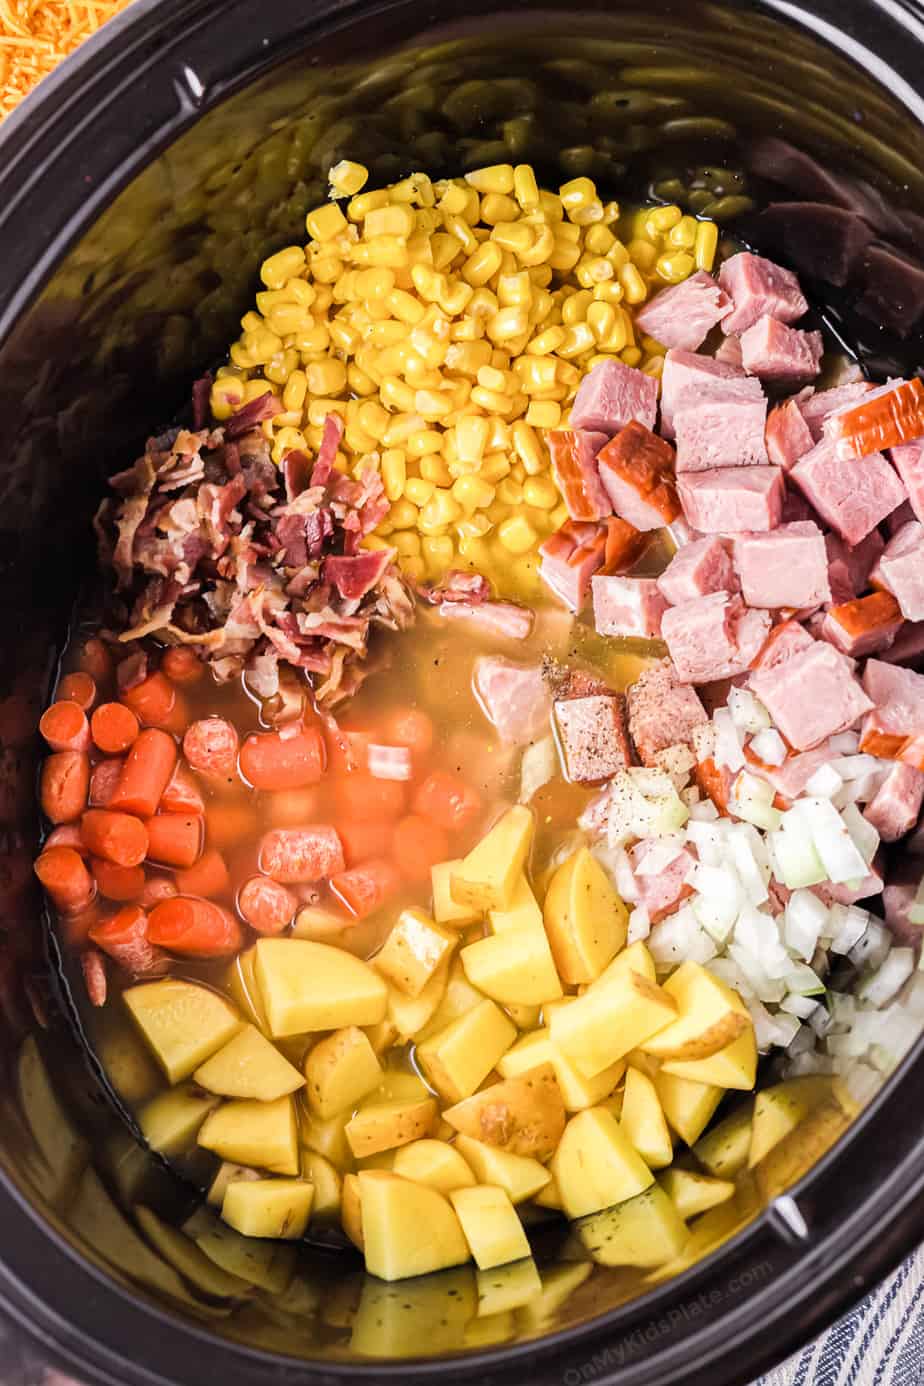 Diced potatoes, ham, bacon, carrots, onions and corn in a broth in a slowcooker pot.